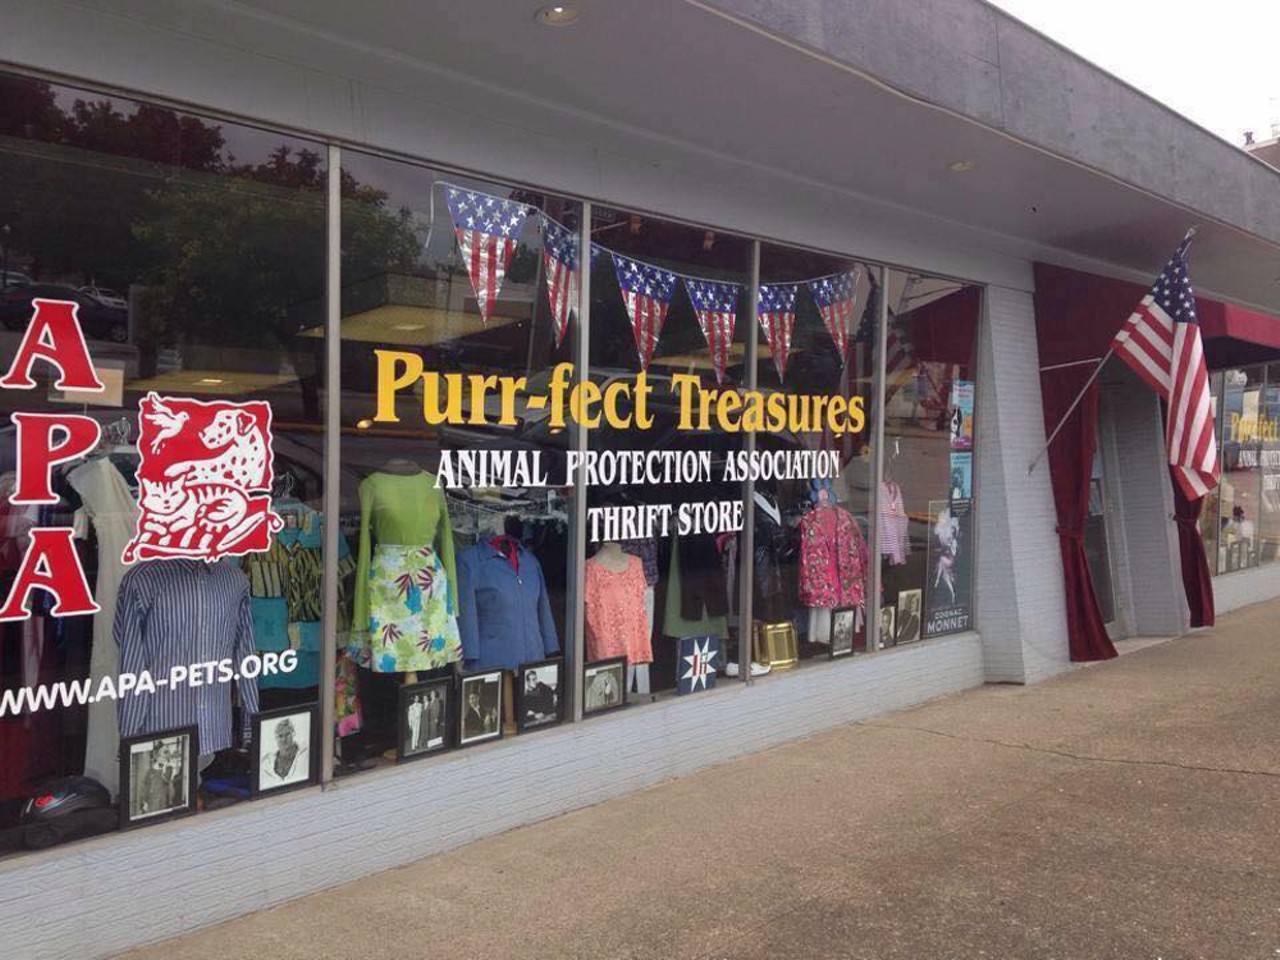  Purr-fect Treasures Thrift Store 
146 Spring St, Jeffersonville, IN
All the proceeds from this volunteer-run thrift store across the river support the Animal Protection Association, a local no-kill cat shelter. Check them out if you&#146;re looking to buy clothes, jewelry, accessories, furniture, and more for a good cause.
Photo via Purr-fect Treasures Thrift Store/Facebook